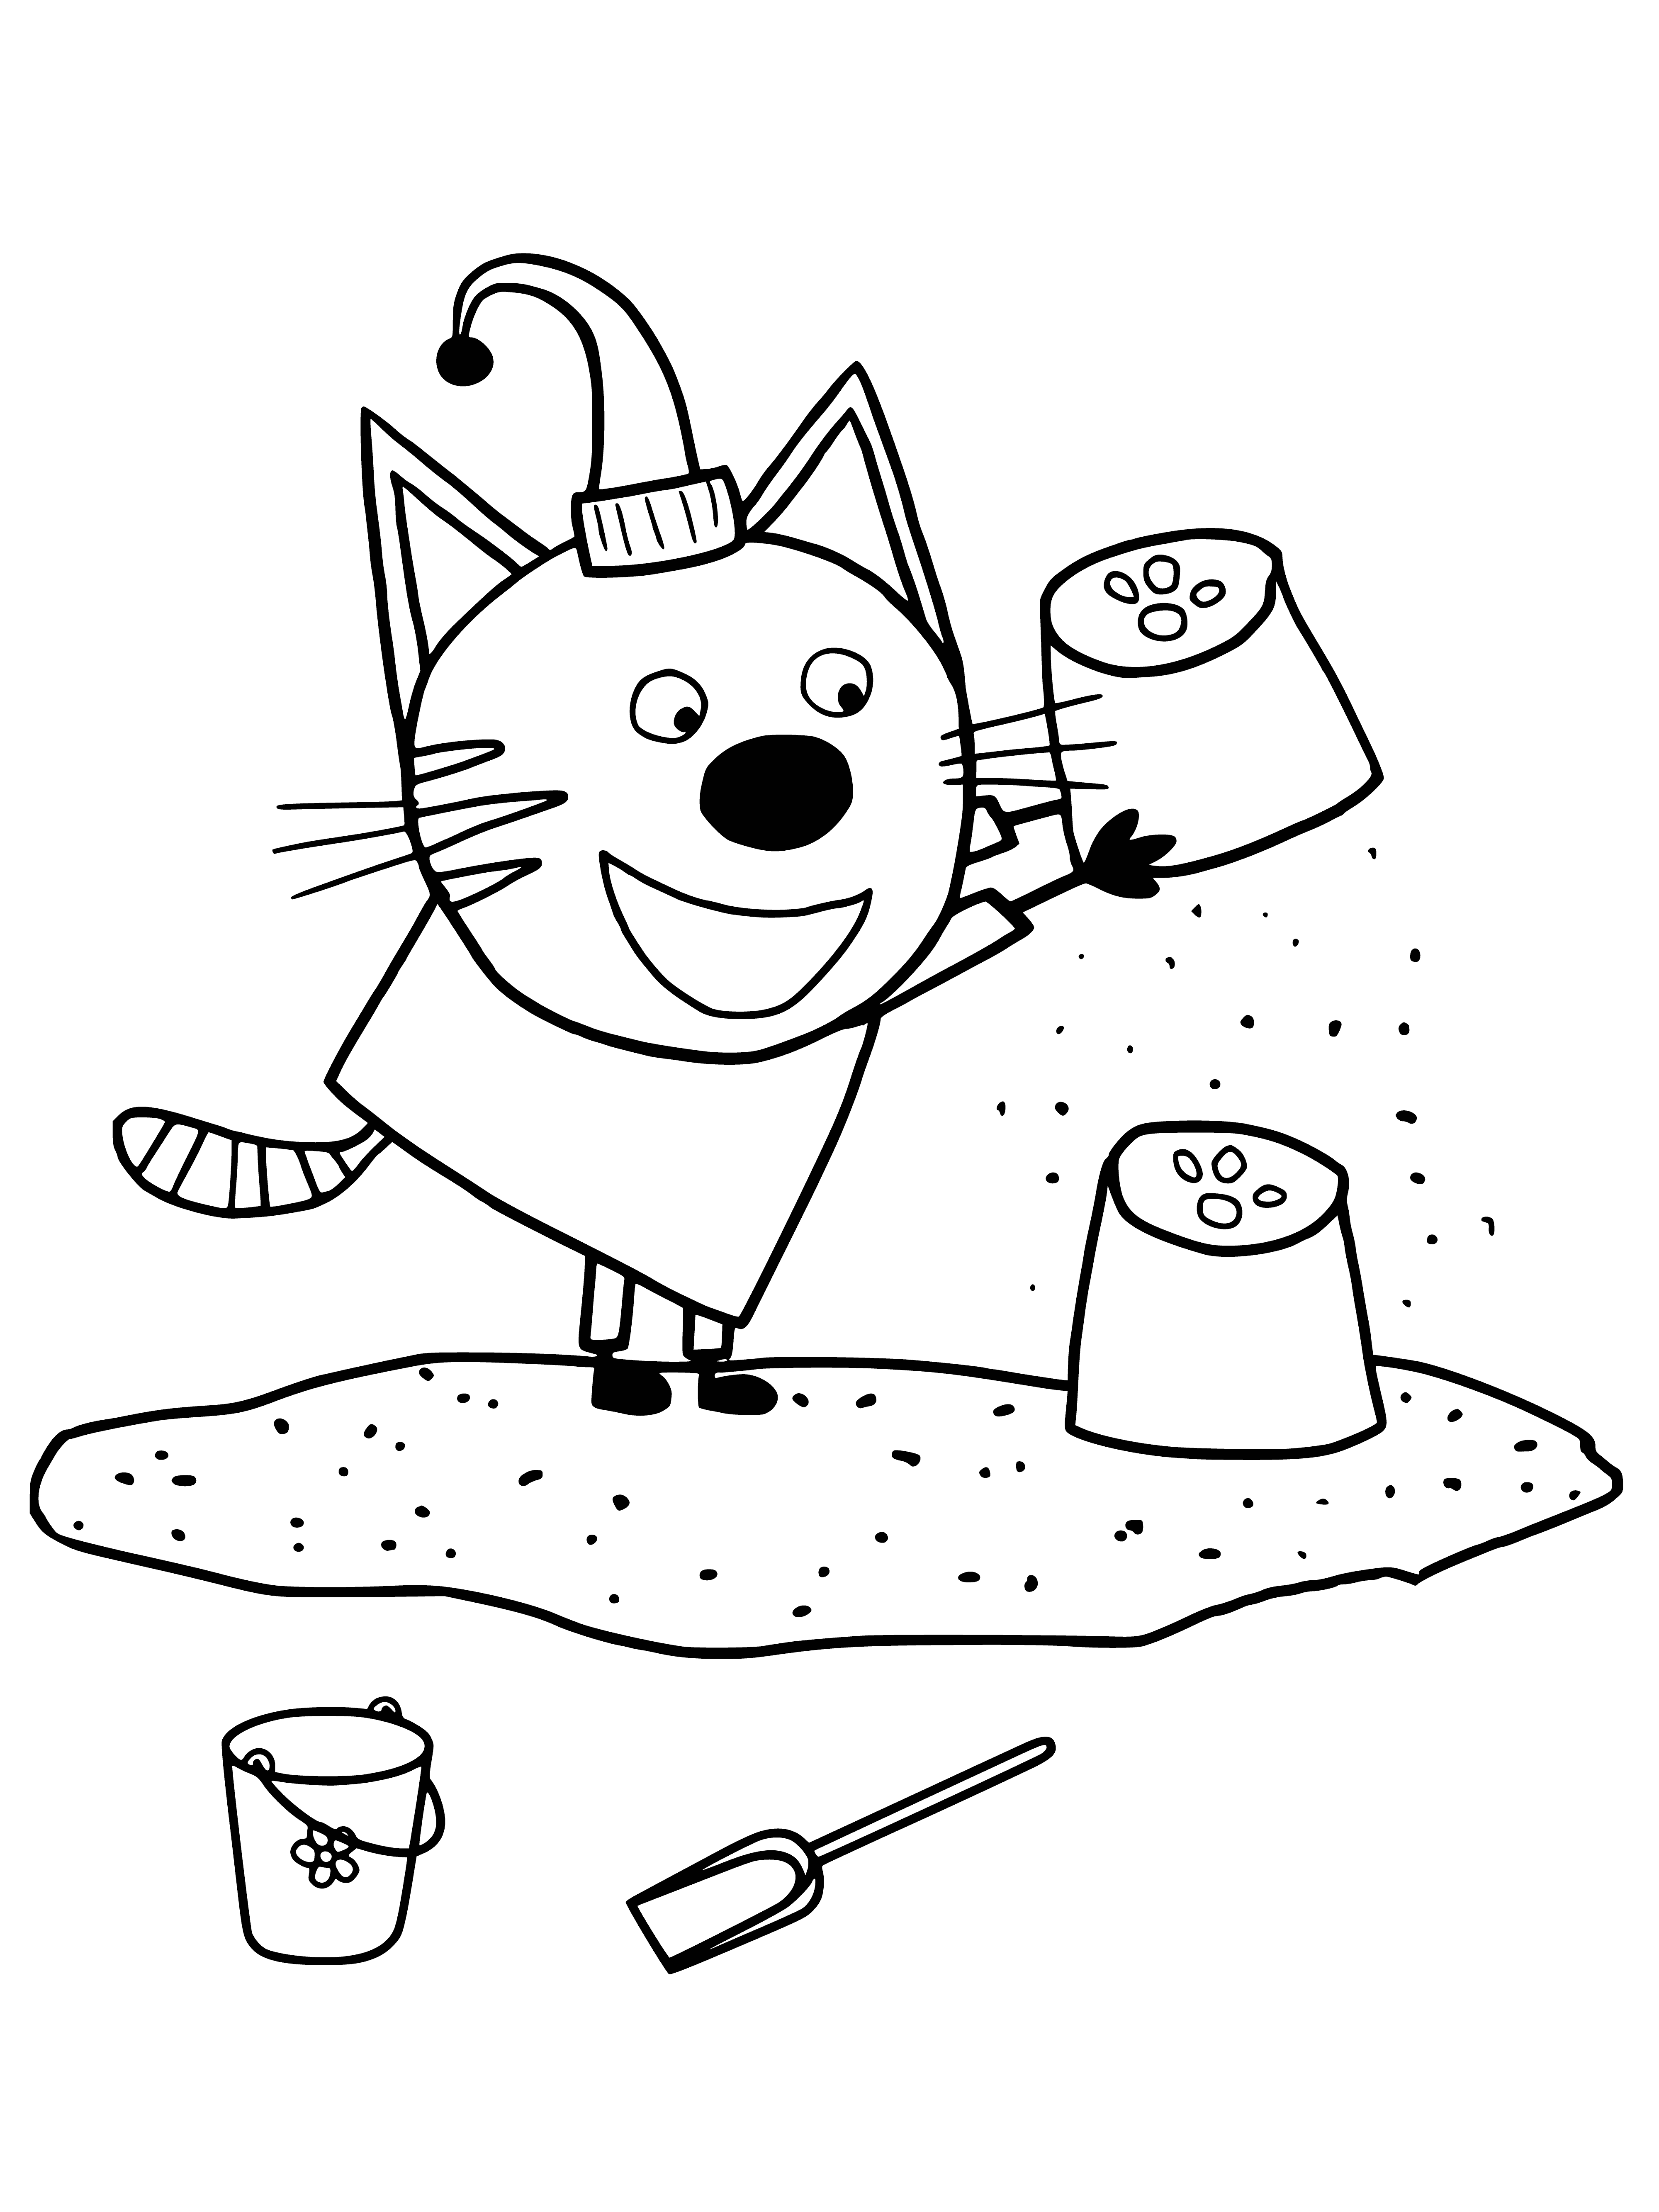 coloring page: Three cats in sandbox - black on back, orange sitting next to it, white on other side.